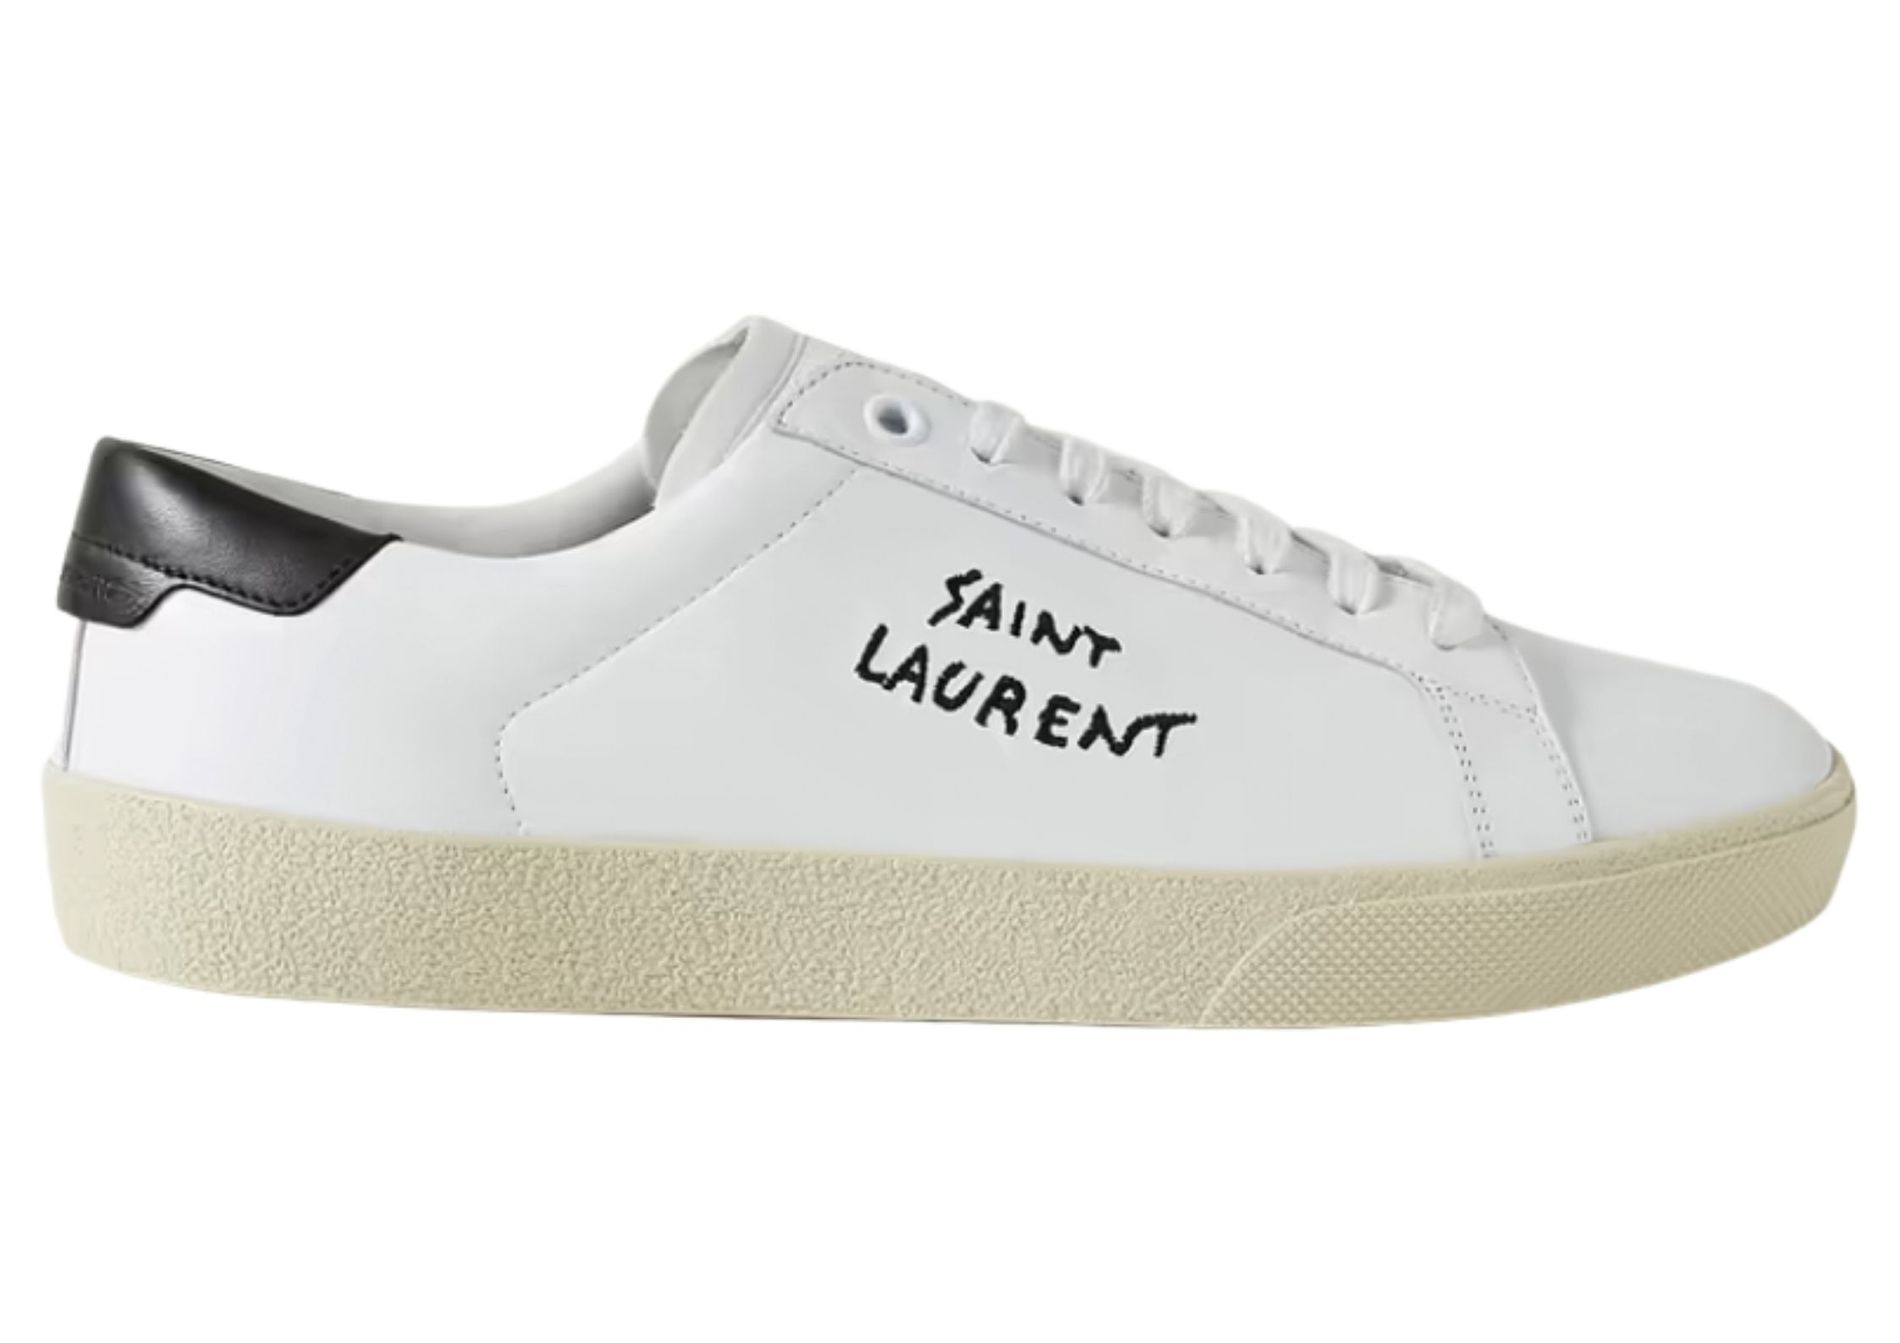 The Best Designer Sneakers No One Else Has - Farfetch